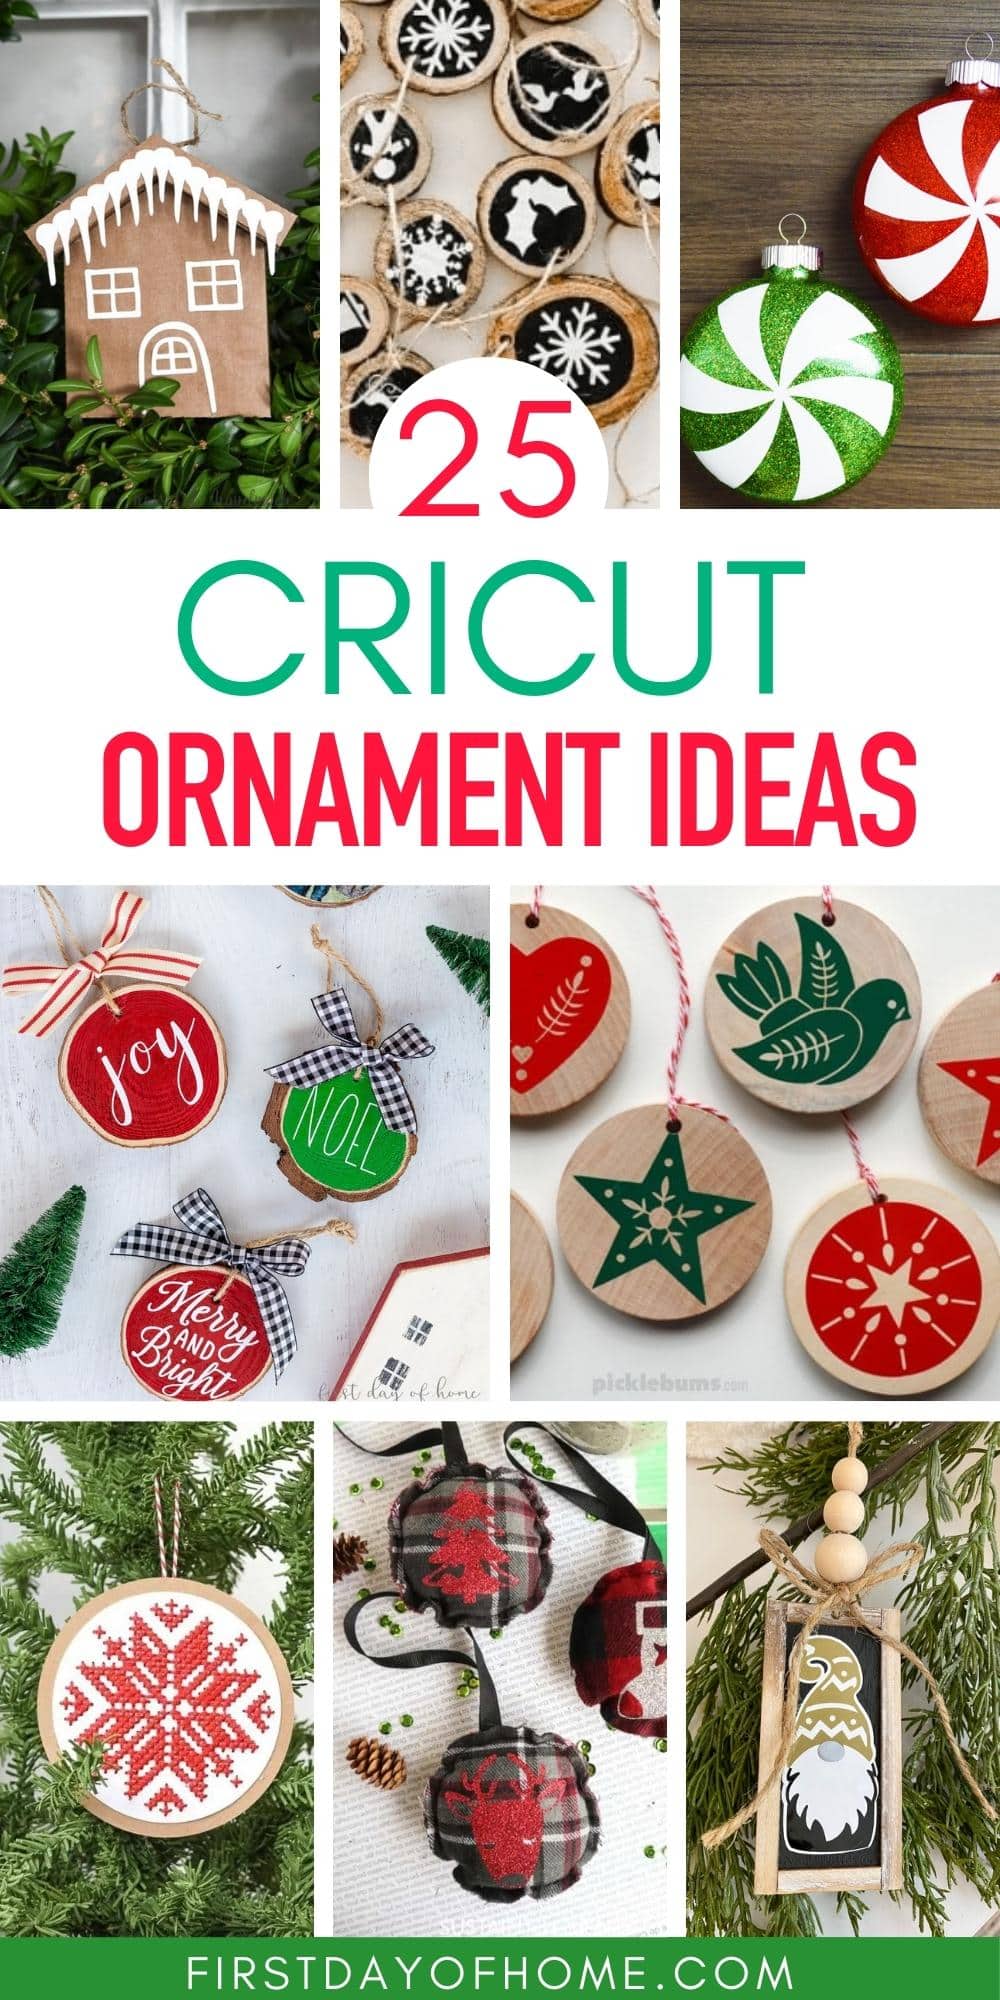 Collage of Cricut Christmas ornaments with text overlay reading "25 Cricut Christmas Ornament Ideas"